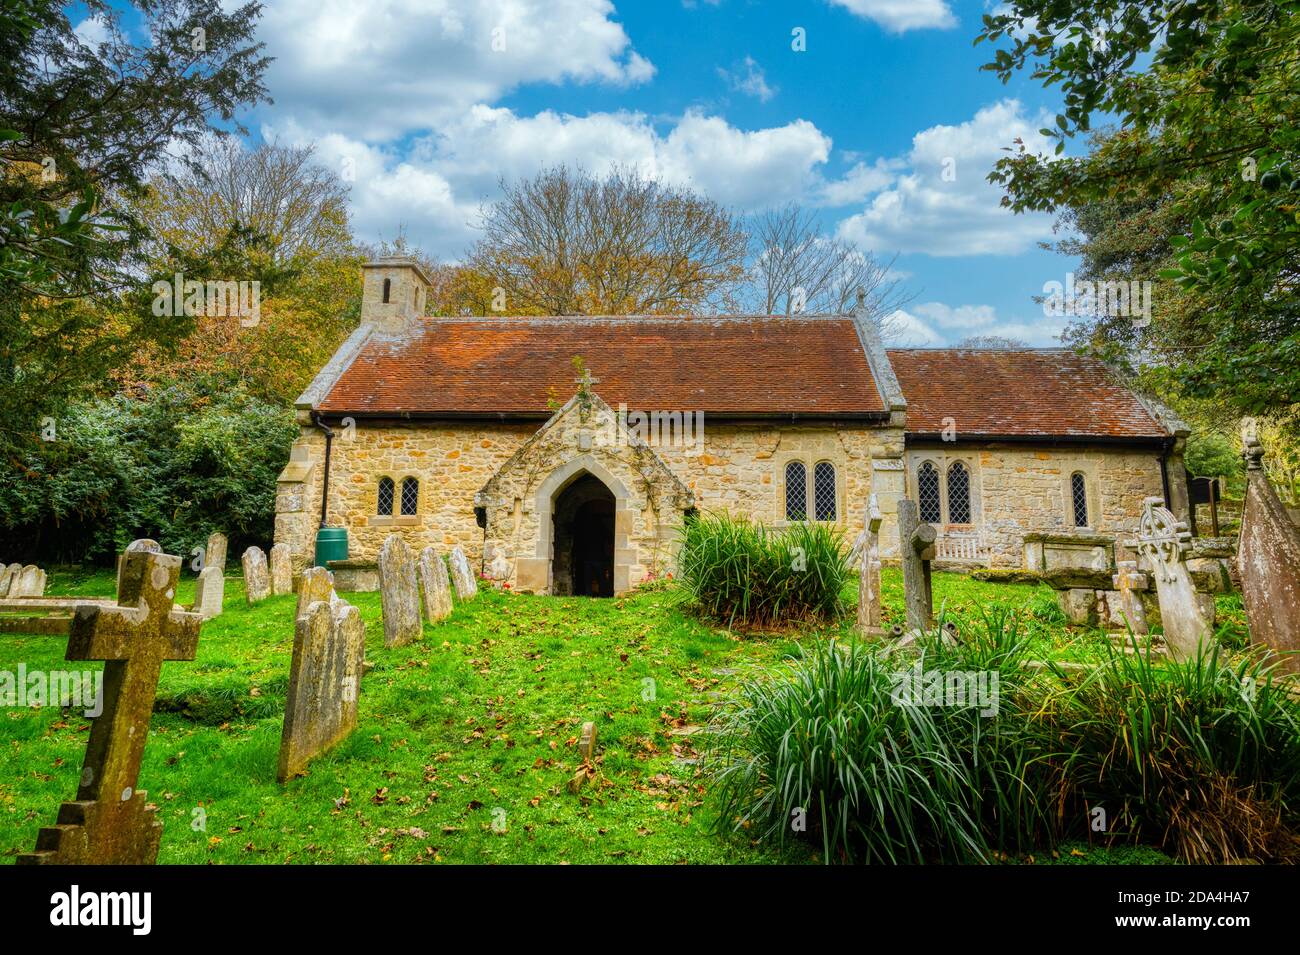 St Boniface Old Church in the village of Bonchurch, Isle of Wight. Stock Photo